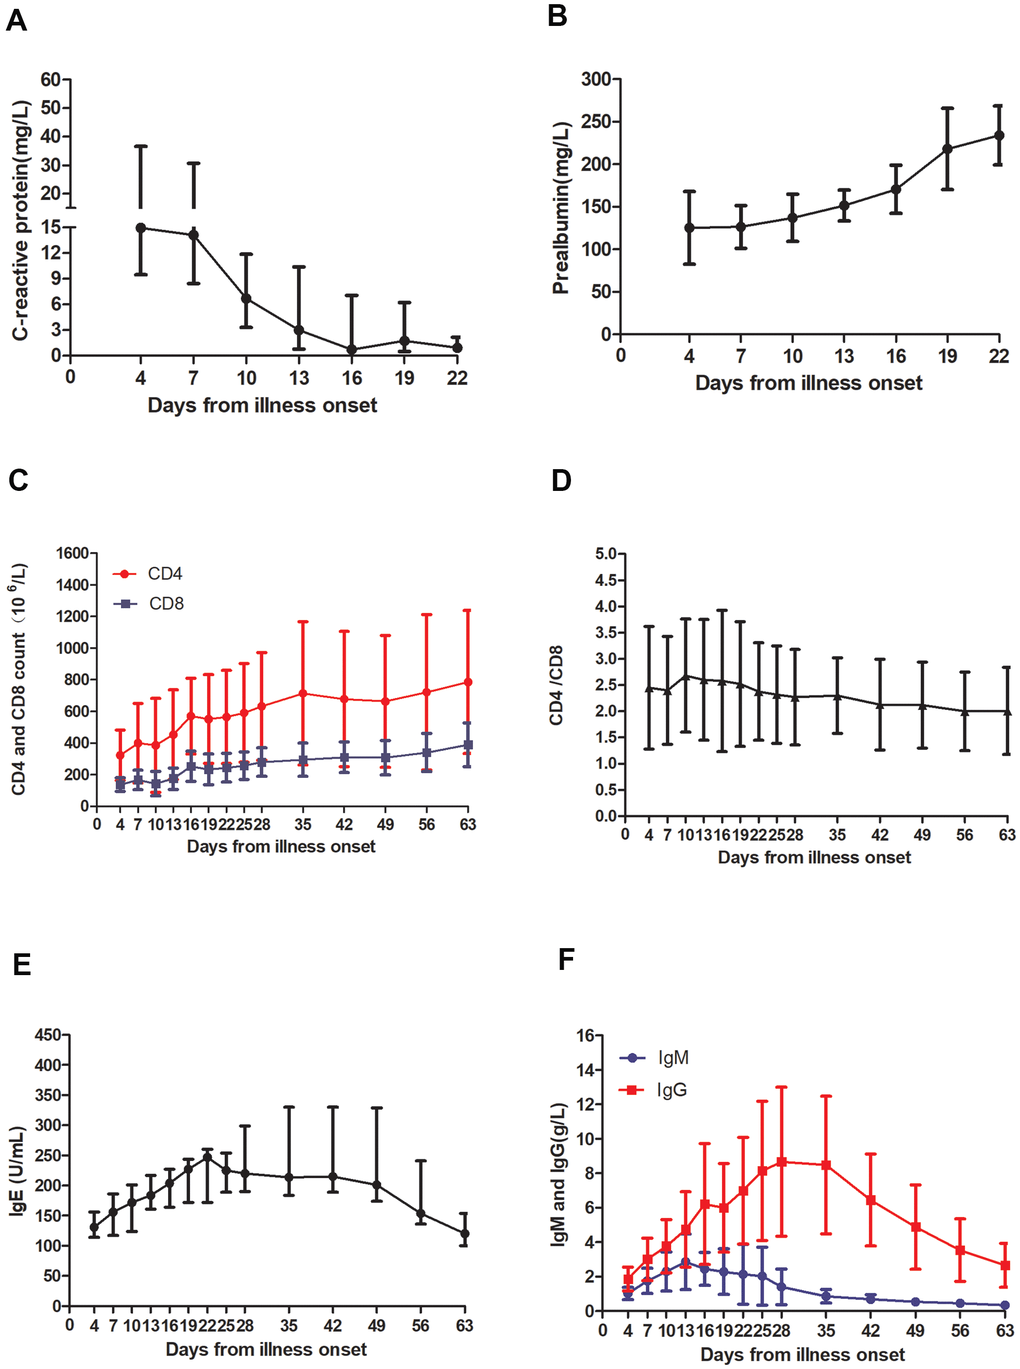 Temporal changes in laboratory markers from illness onset in patients hospitalized with COVID-19. Temporal changes in (A) C-reactive protein, (B) prealbumin, (C) the absolute values of CD4 and CD8, (D) CD4/CD8, (E) IgE, and (F) SARS-CoV-2 IgM and SARS-CoV-2 IgG. (A, E) the data are presented as the median (quartile) M(P25,P25), (B, C, D, F) the data are displayed as the mean ± SD.